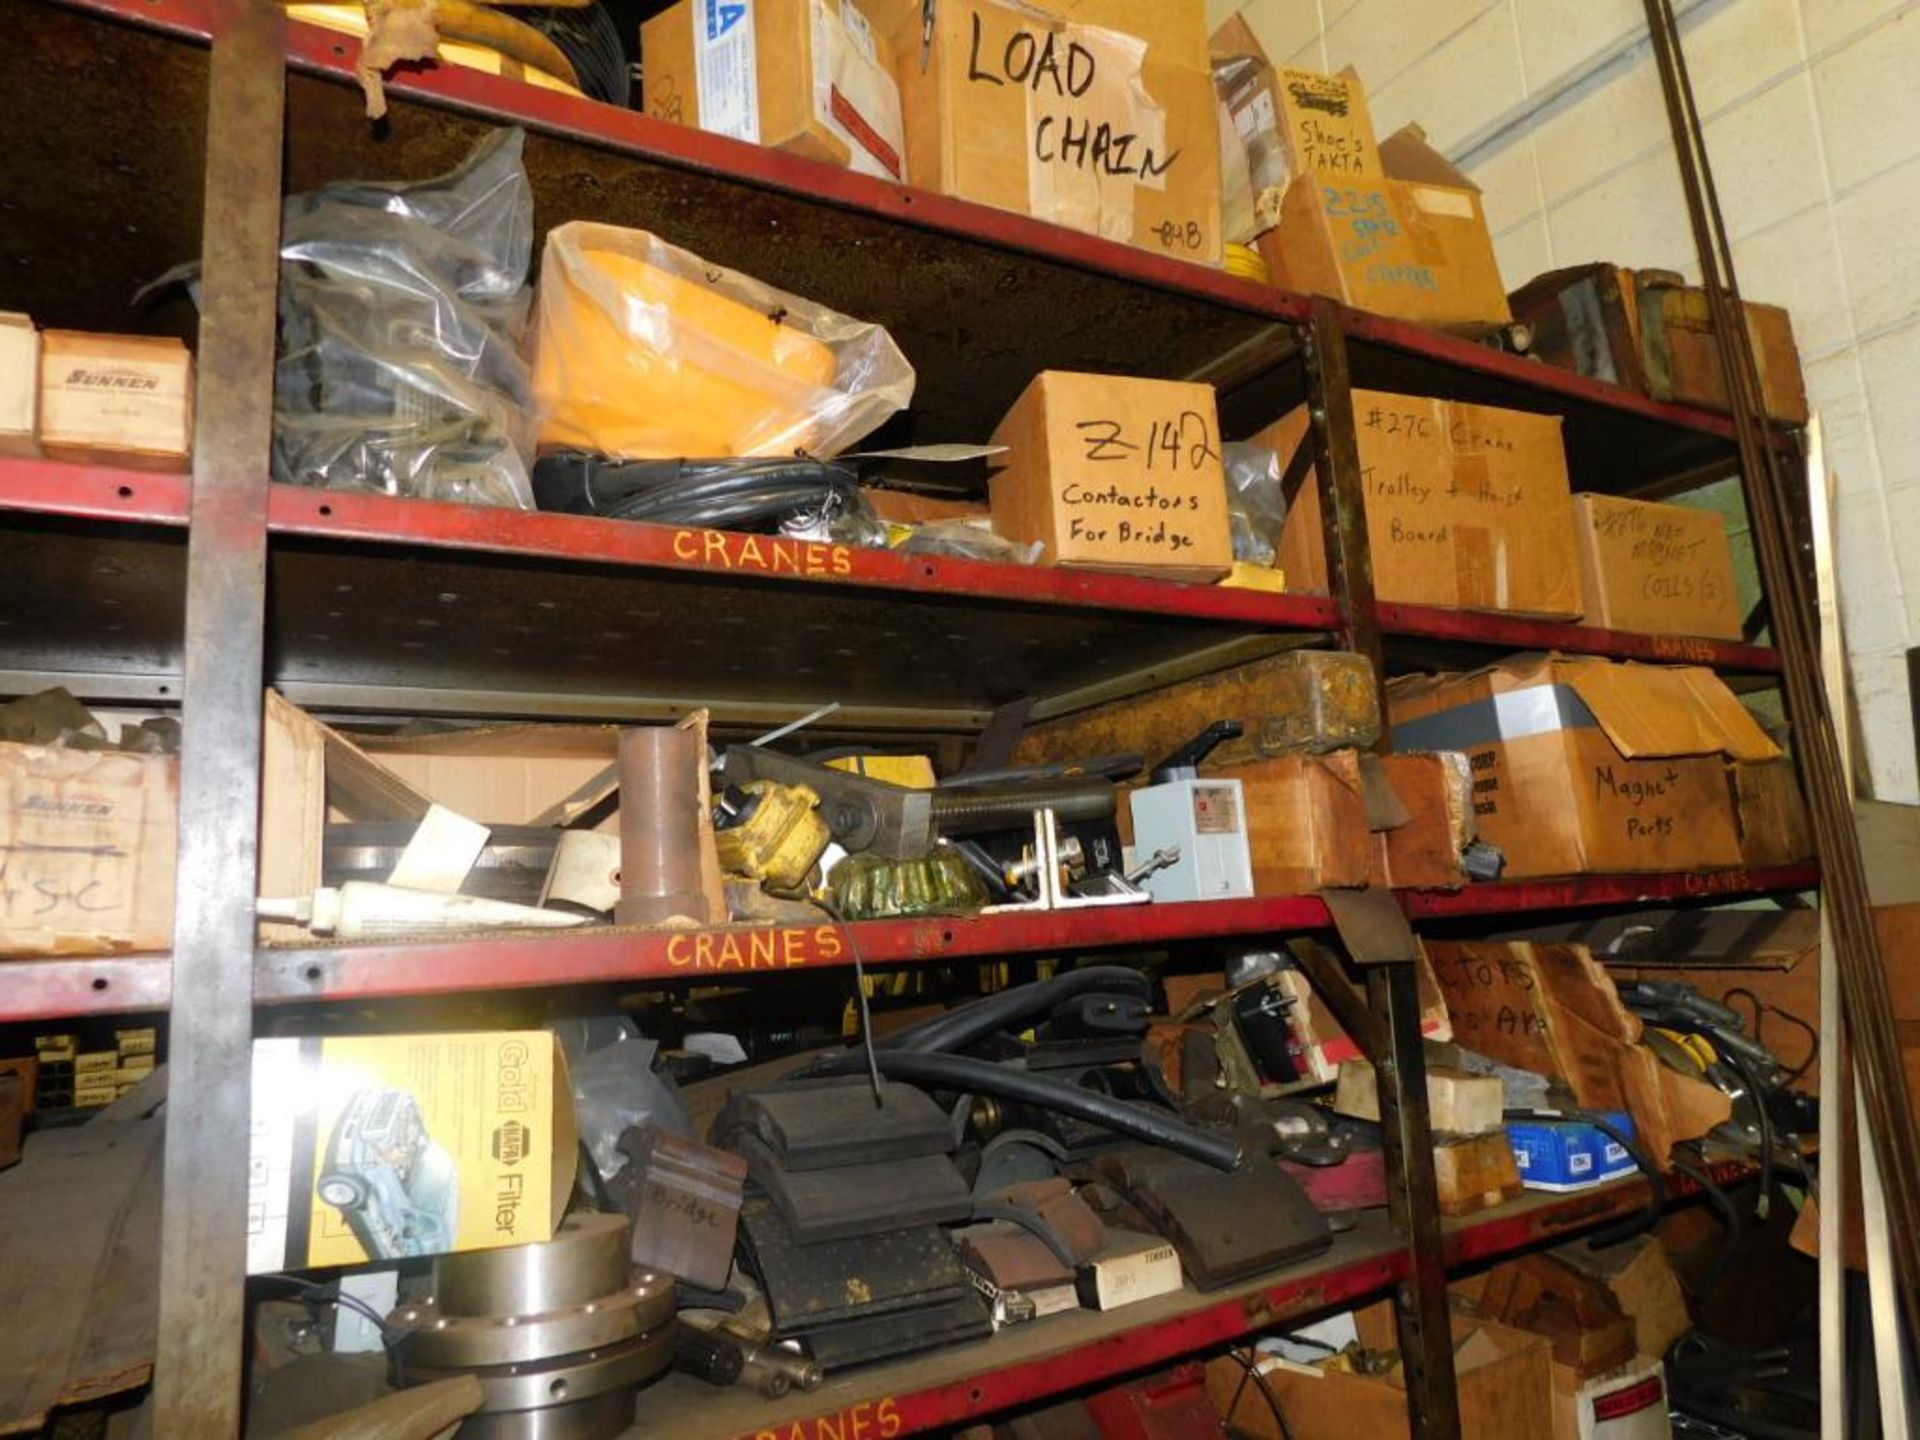 LOT: Contents of Back Maintenance Room: (2) Racks of Contents, Machine Parts, Hosing, Wire, Parts Wa - Image 11 of 16